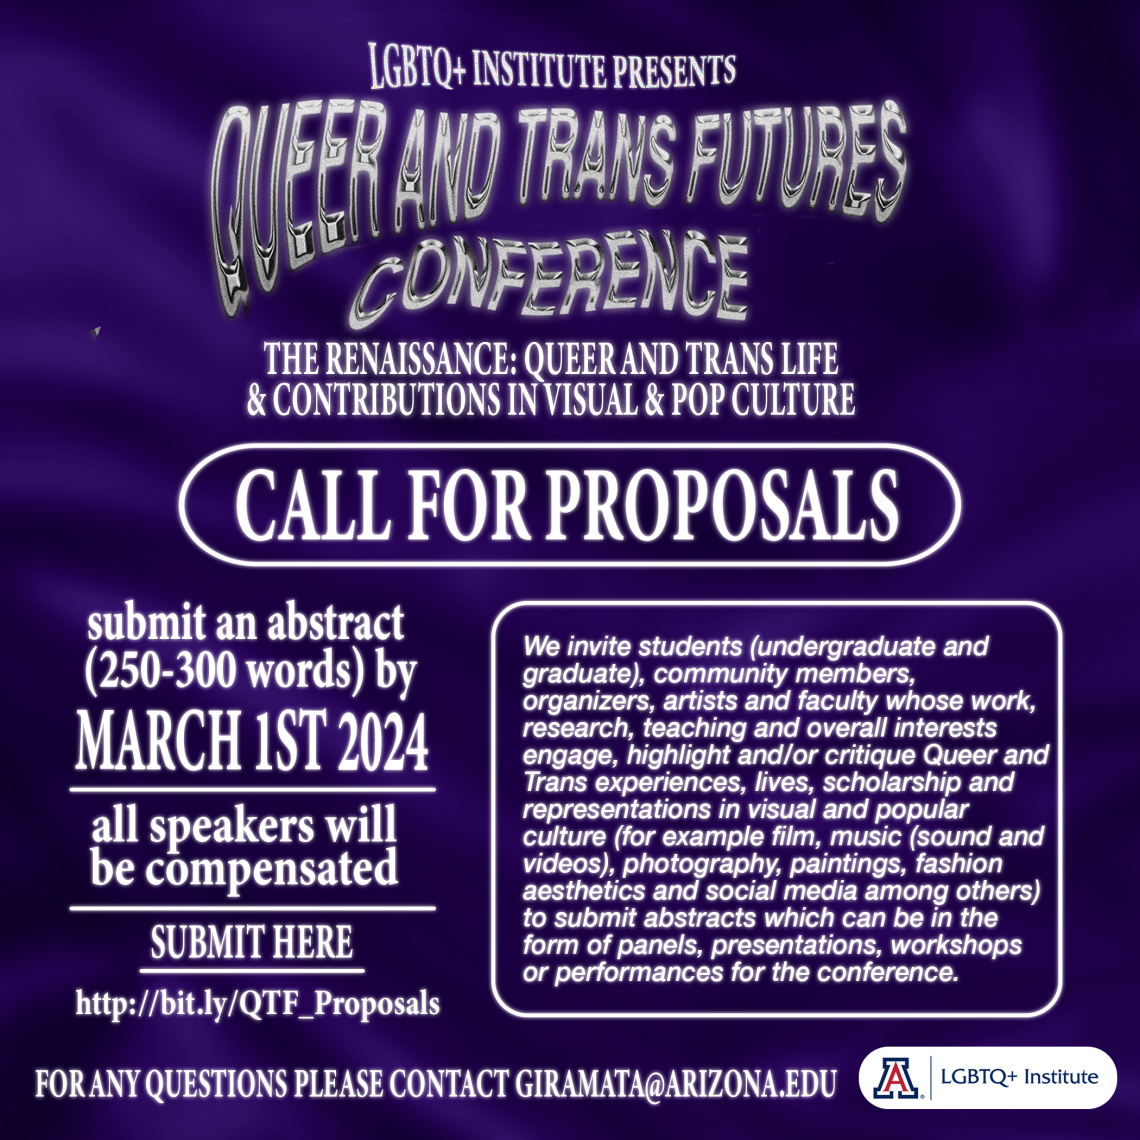 queer and trans futures conference